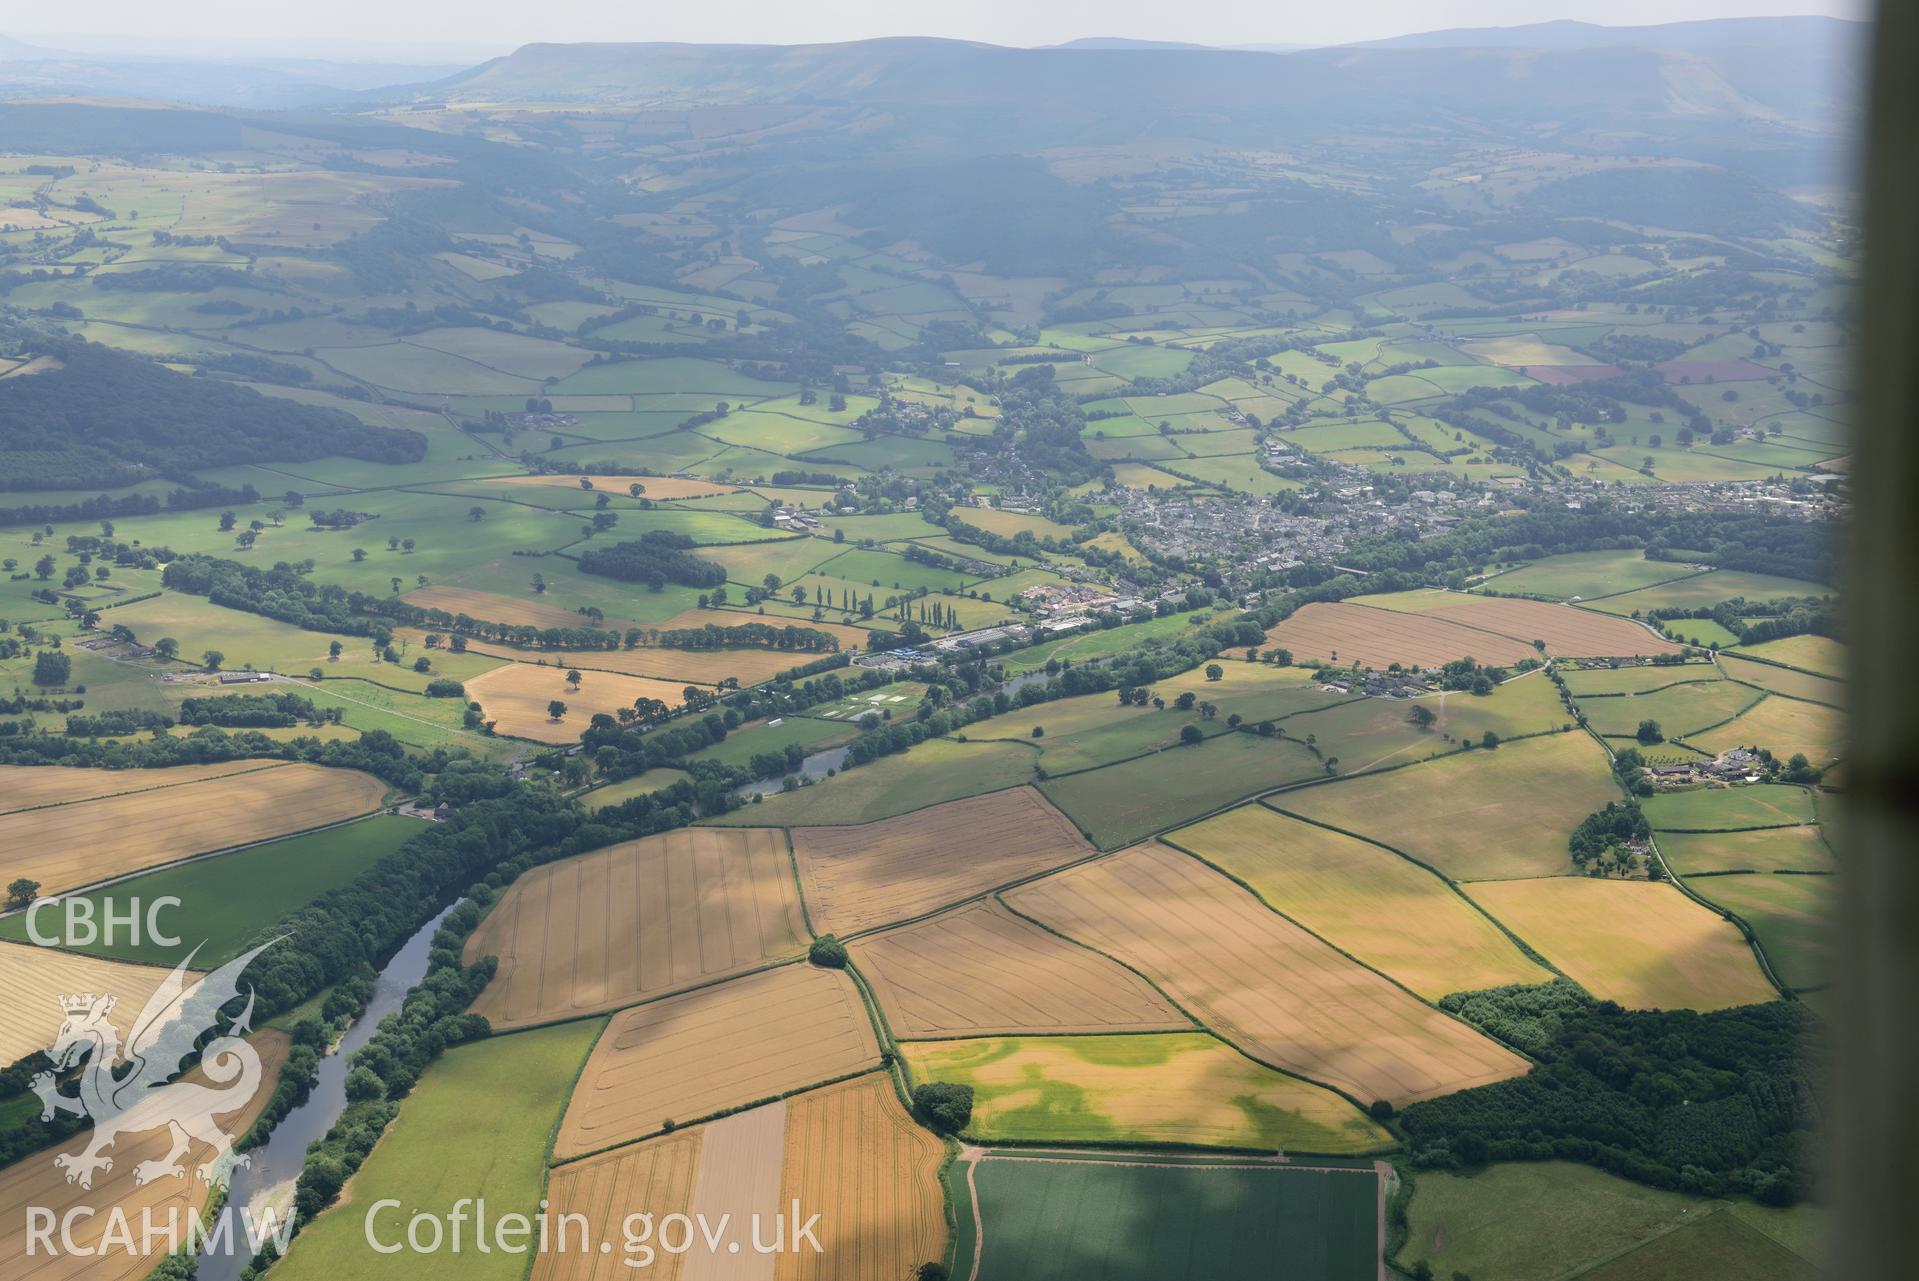 Royal Commission aerial photography of Hay on Wye taken on 19th July 2018 during the 2018 drought.